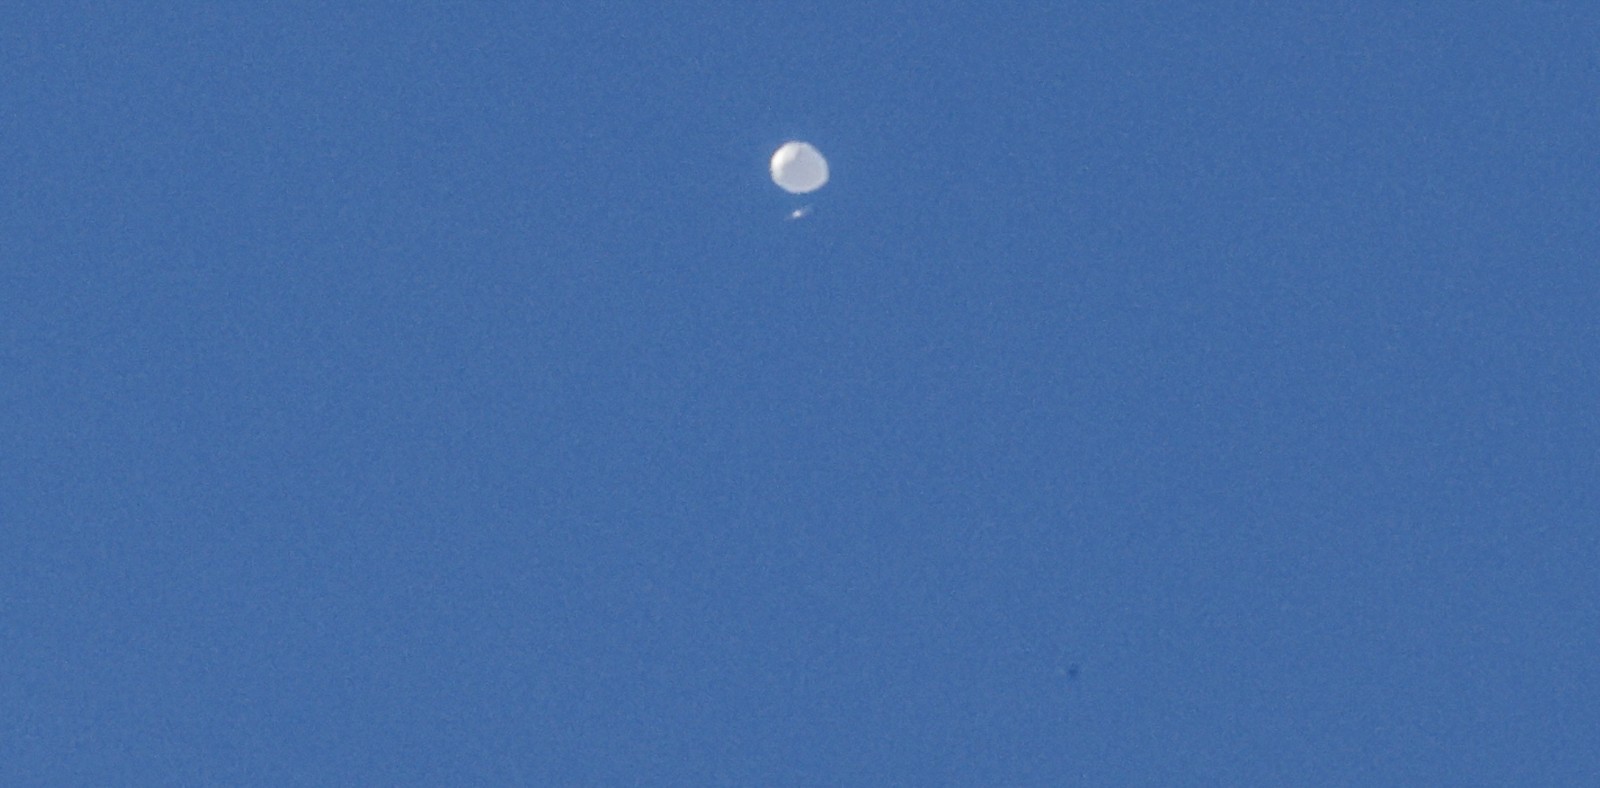 epa10447610 A high-altitude balloon, which the US government has stated is Chinese, is seen as it continues its multi-day path across the Northern United States in Charlotte, North Carolina, USA, 04 February 2023. US Secretary of State Blinken postponed a planned trip to China following the discovery of the balloon. The Pentagon said that the maneuverable Chinese surveillance balloon was posing 'no risk to commercial aviation, military assets or people on the ground'.  EPA/NELL REDMOND -- BEST QUALITY AVAILABLE